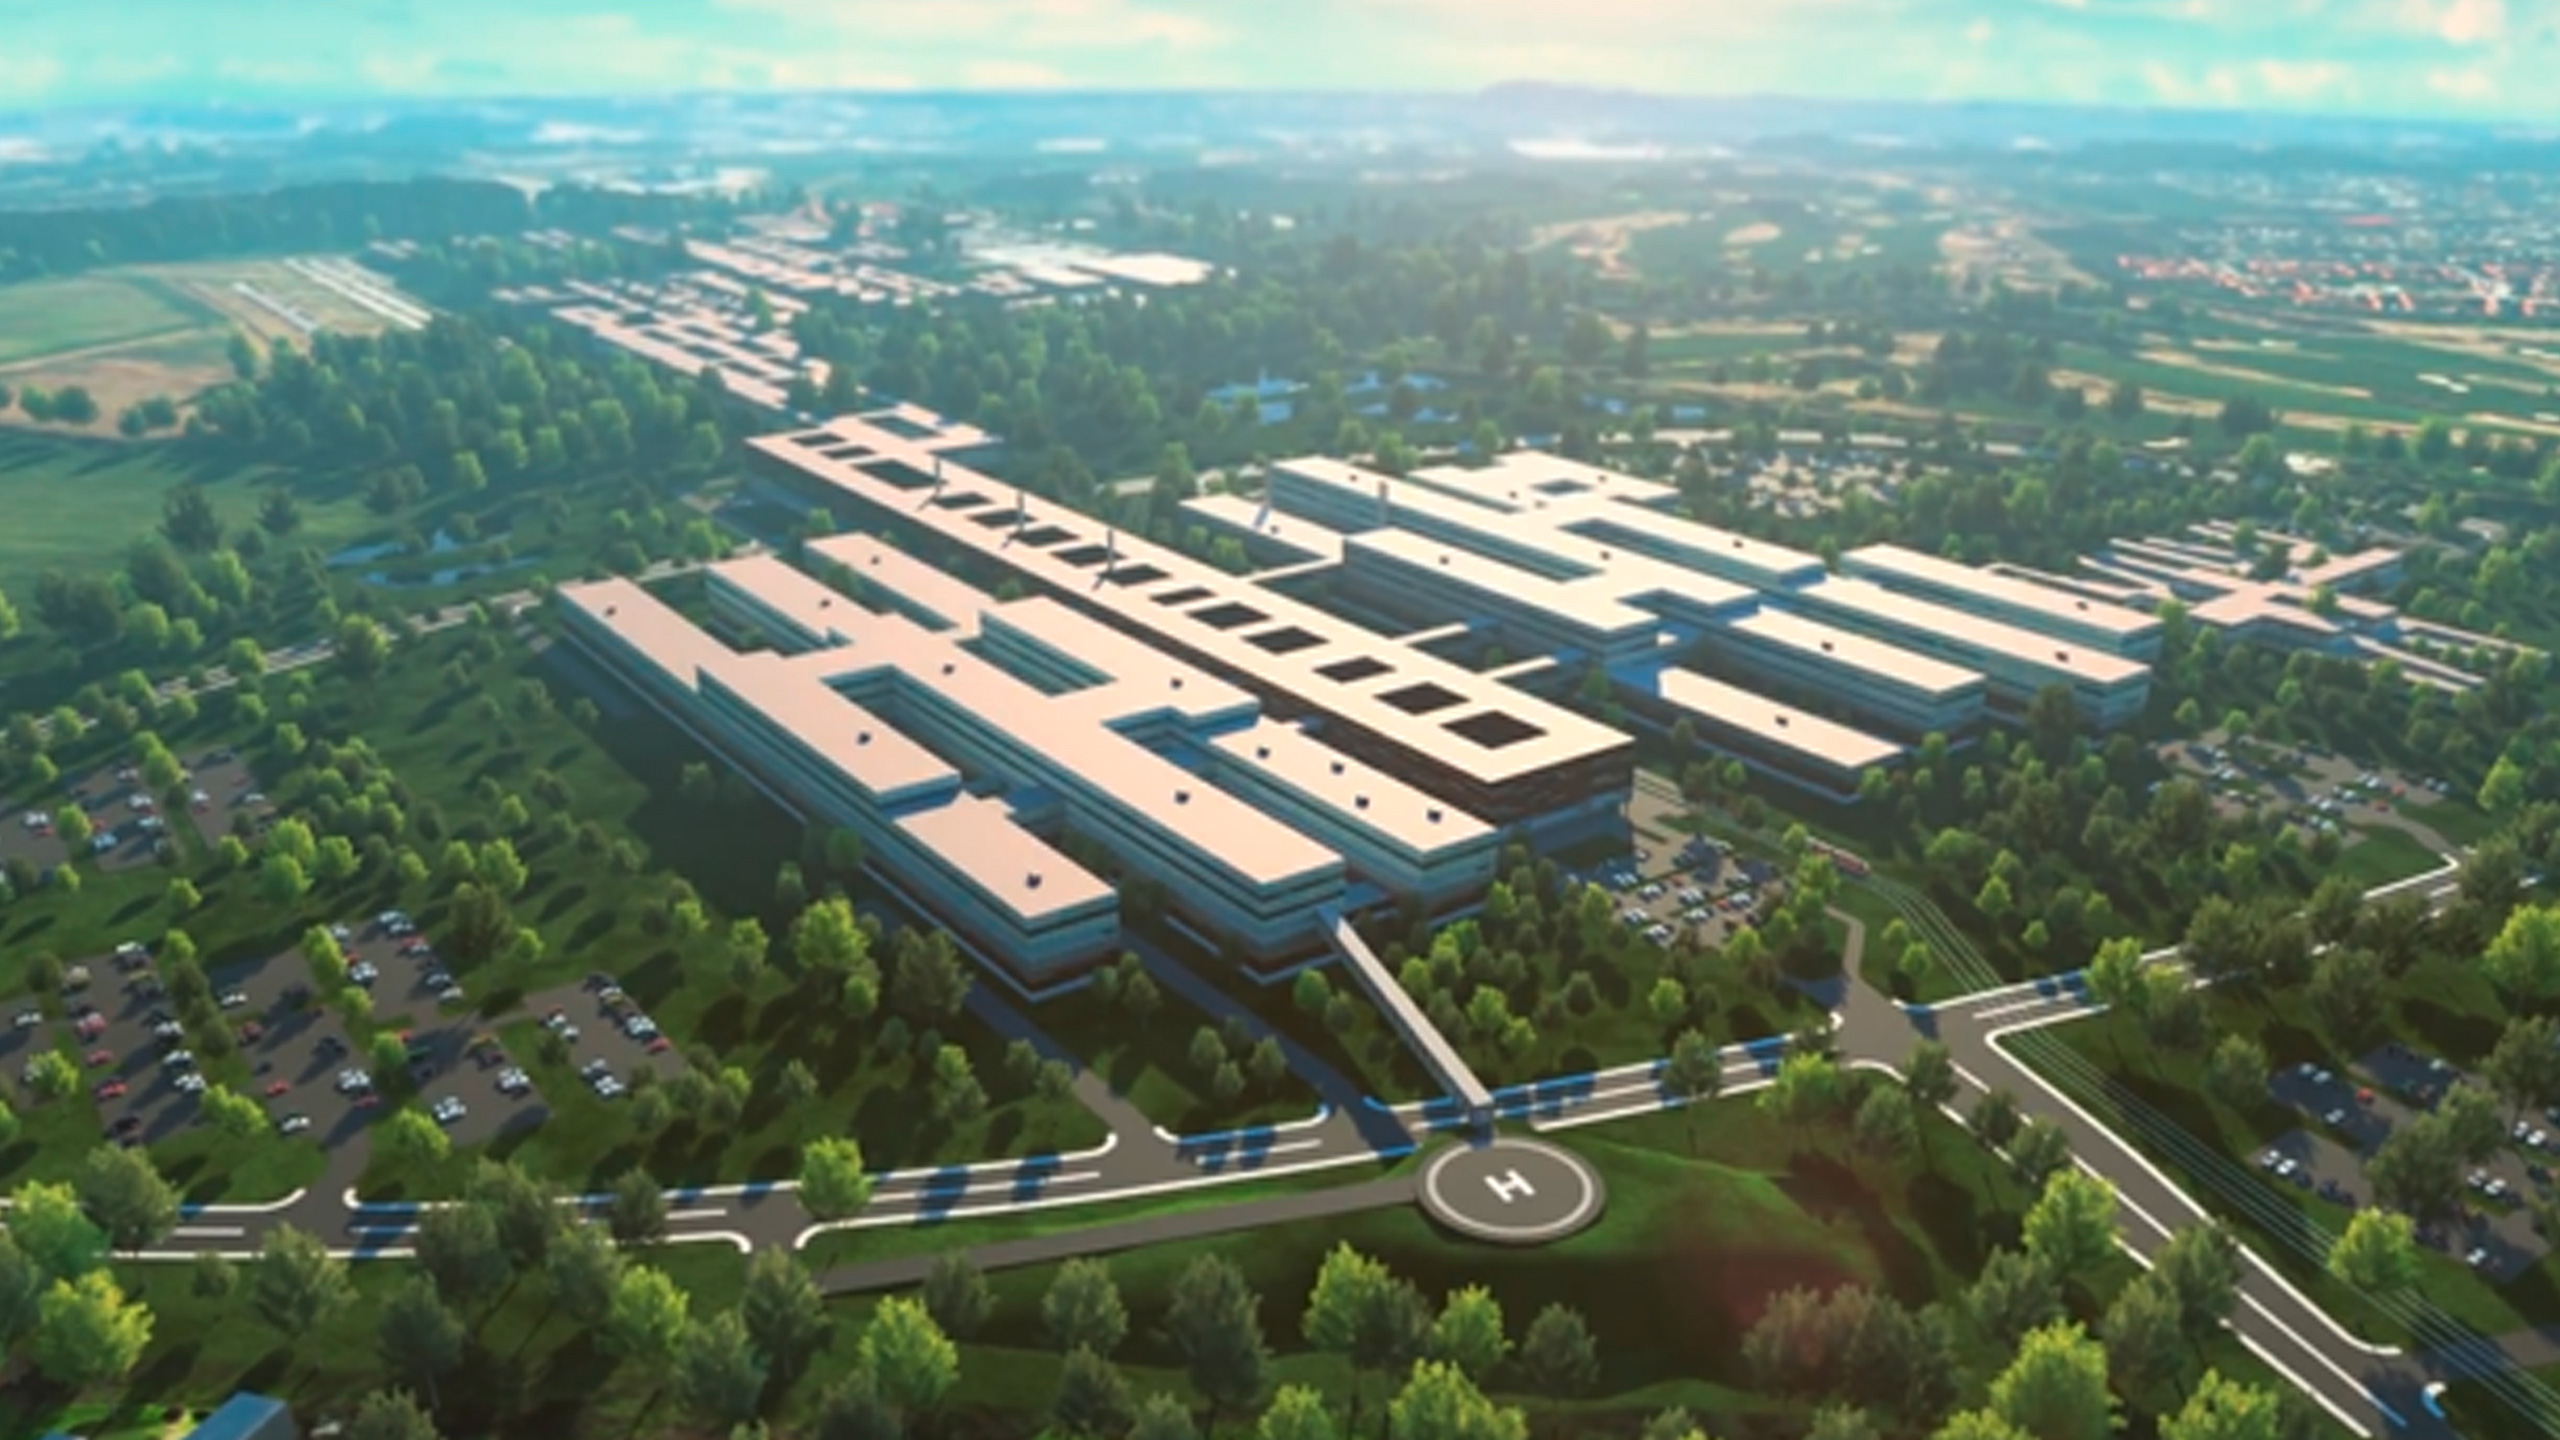 Animated overview of the new university hospital in Odense, Denmark